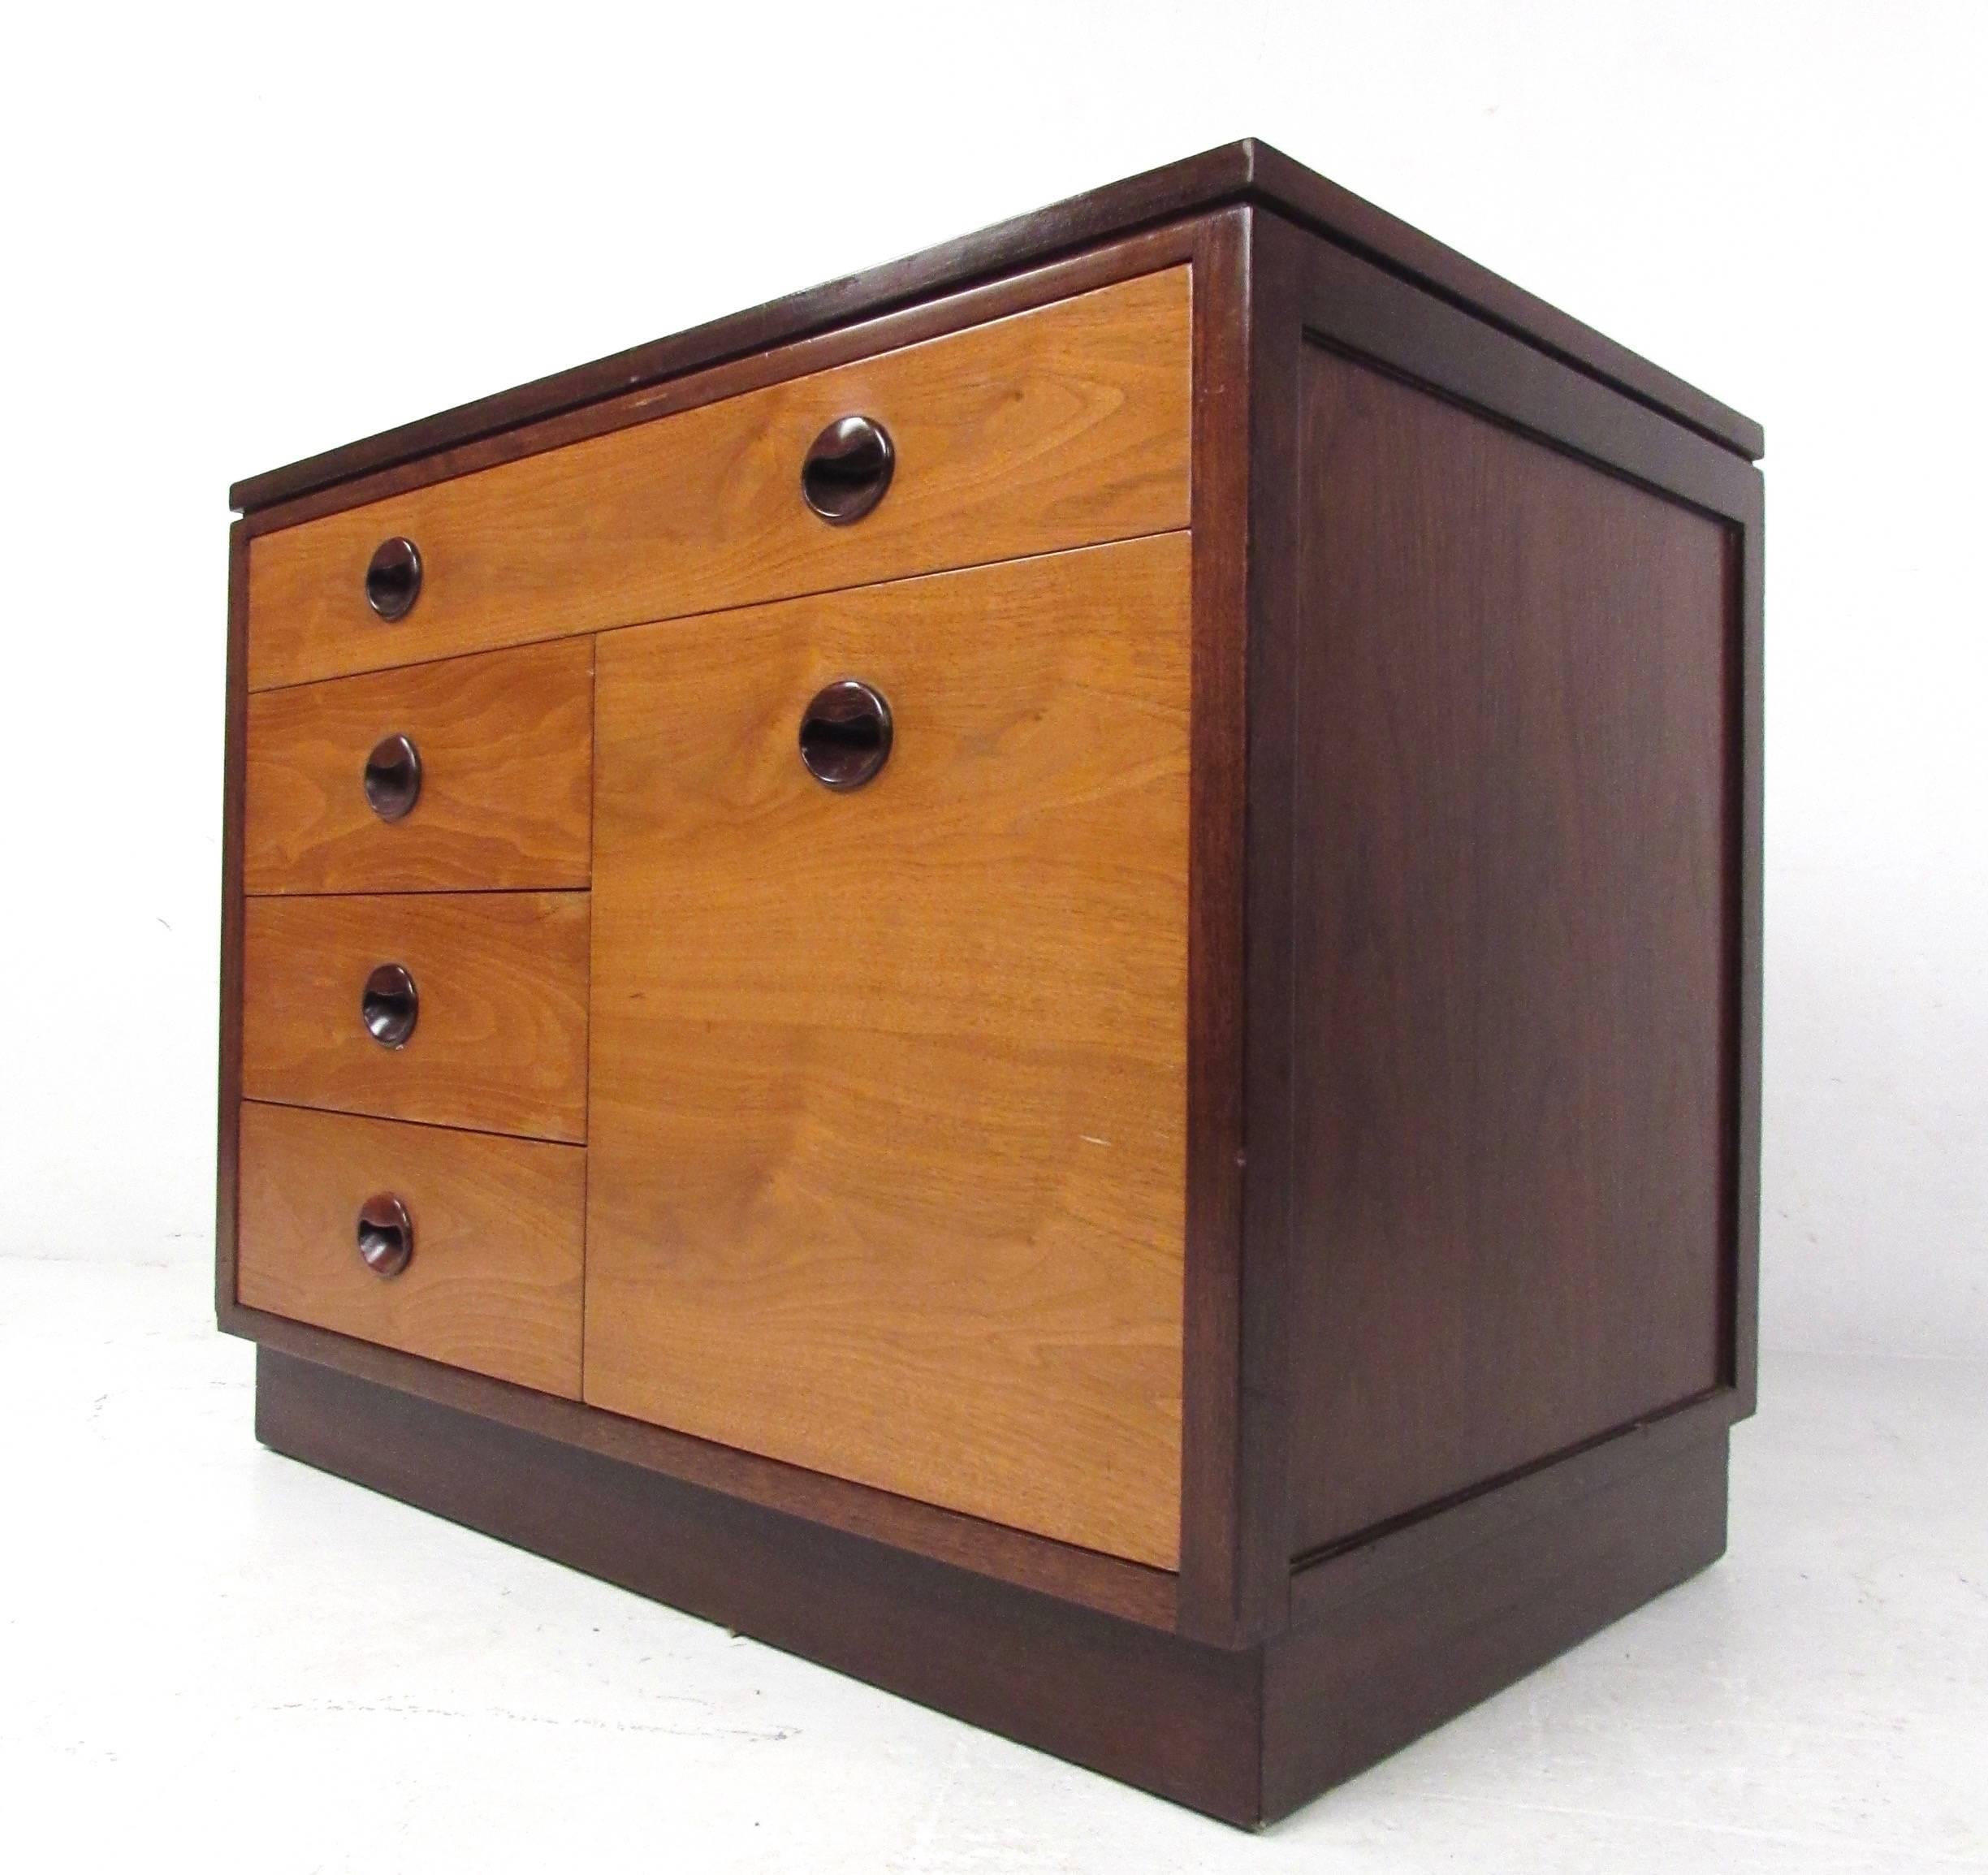 This stylish vintage cabinet features unique banded wood front and plenty of drawer space for organization and storage. Unique pulls, beautiful vintage wood tone and quality craftsmanship make this an ideal storage piece for home or office. Please